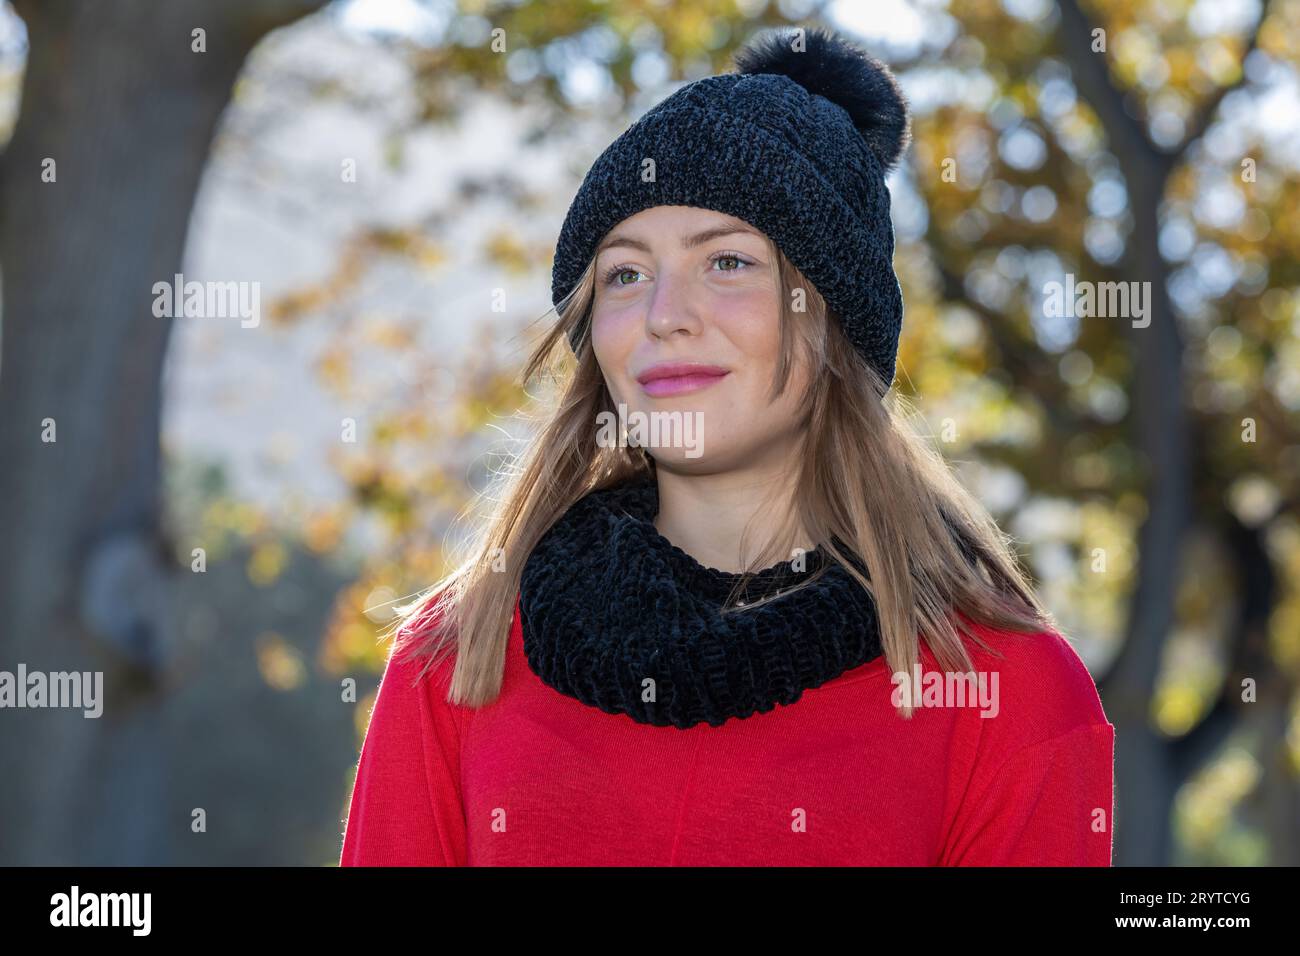 In a head and shoulders shot, a stunning young blonde woman, wearing a black woolen hat and a bright red sweater, radiates under the autumn trees Stock Photo